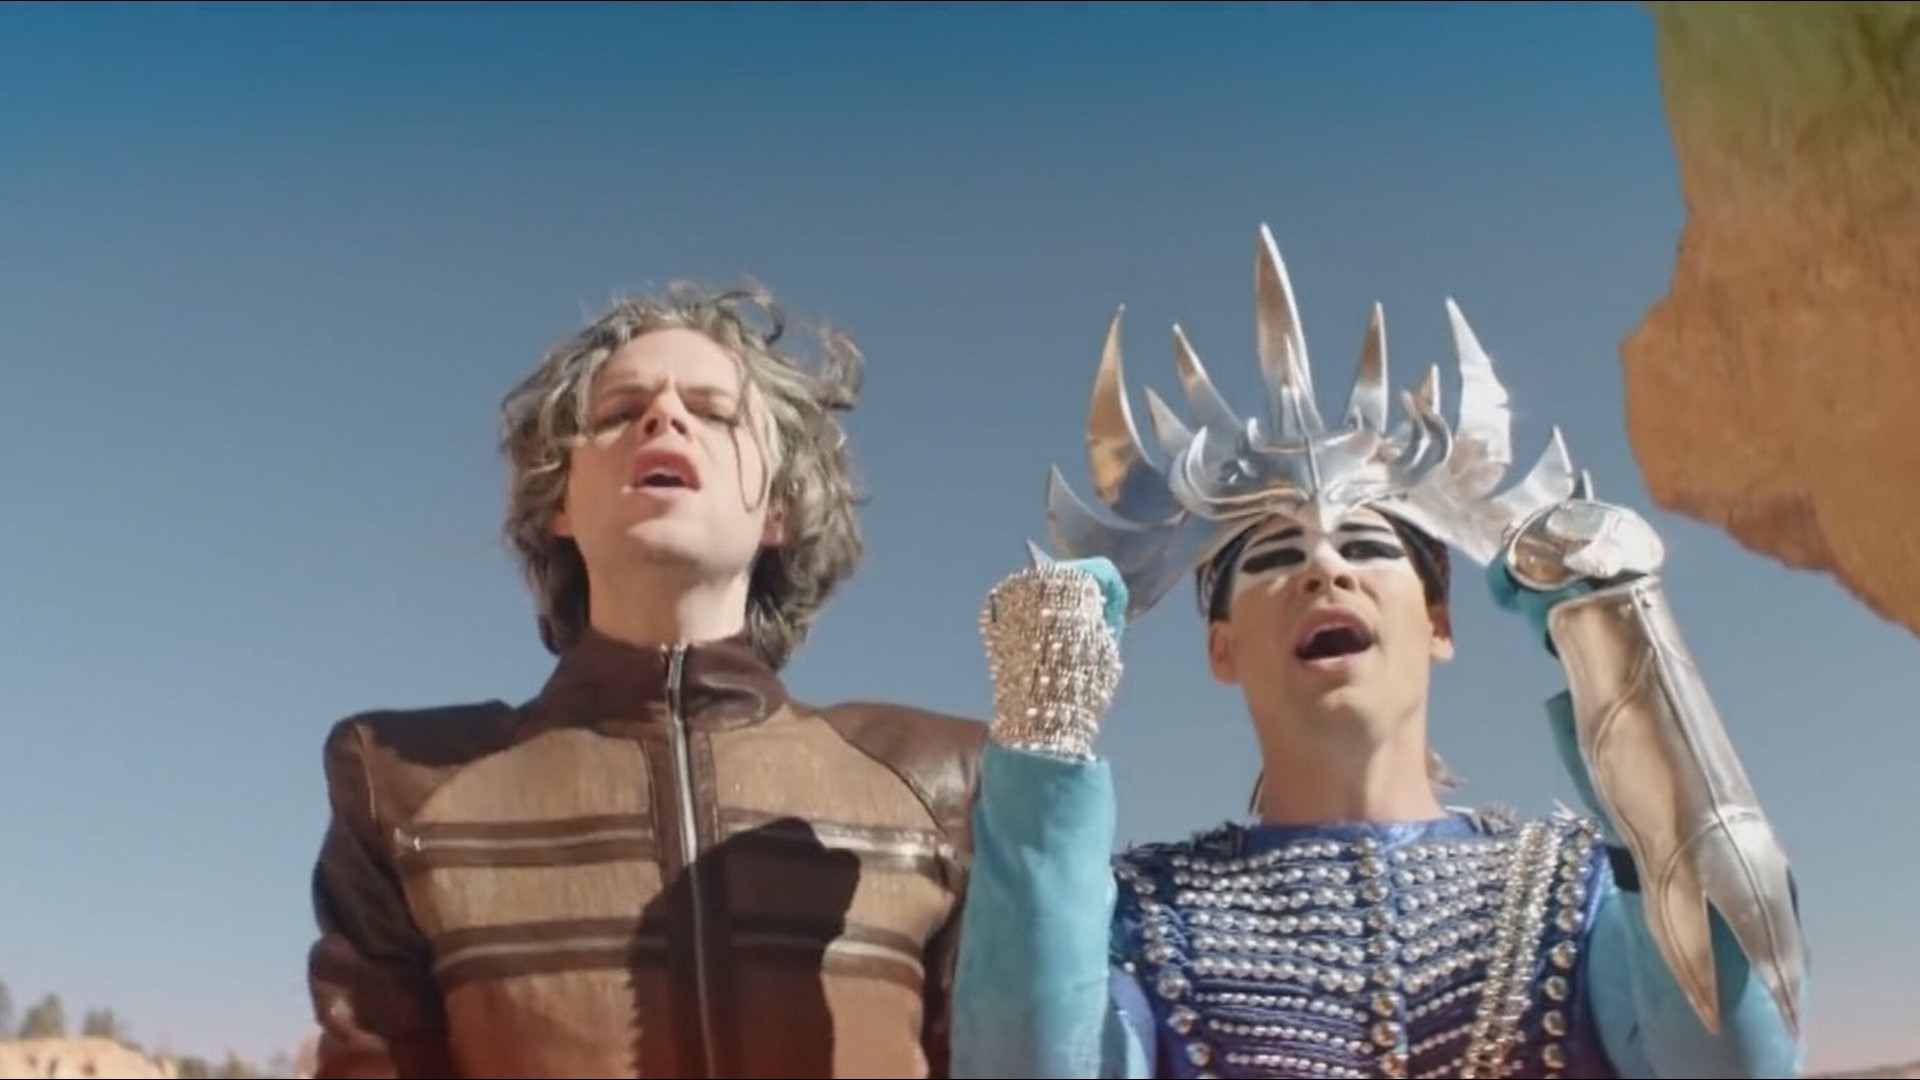 Empire of The Sun comes to Seattle with their tenth anniversary tour of their debut album, and many more artists to see this week - KEXP Music That Matters